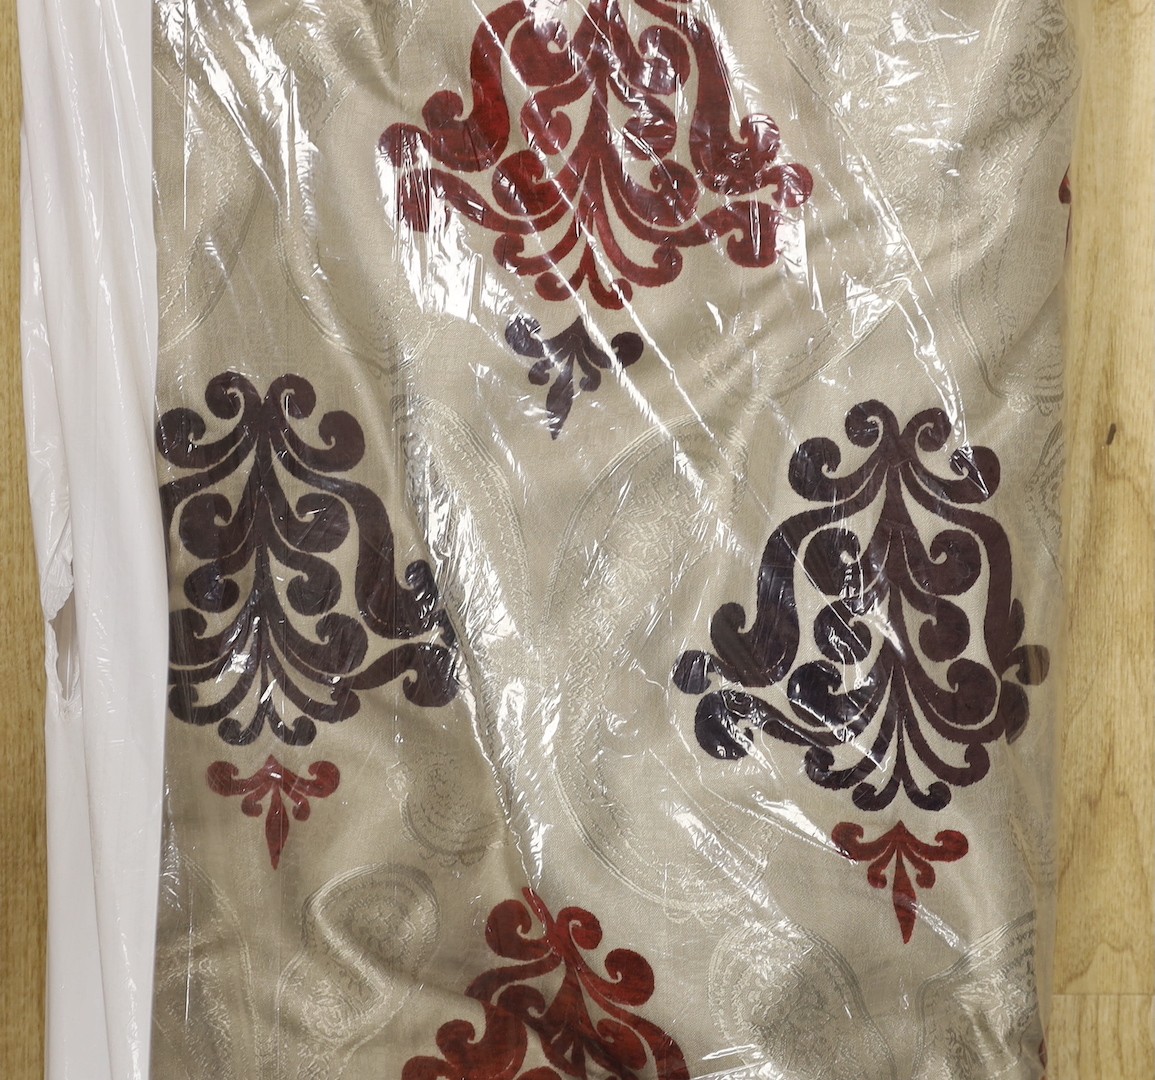 A large pair of silver brocaded curtains, with a woven paisley tear drop motif and large all over plum cut velvet Fleur-de-lis motifs, together with matching corded and tasselled tie backs.